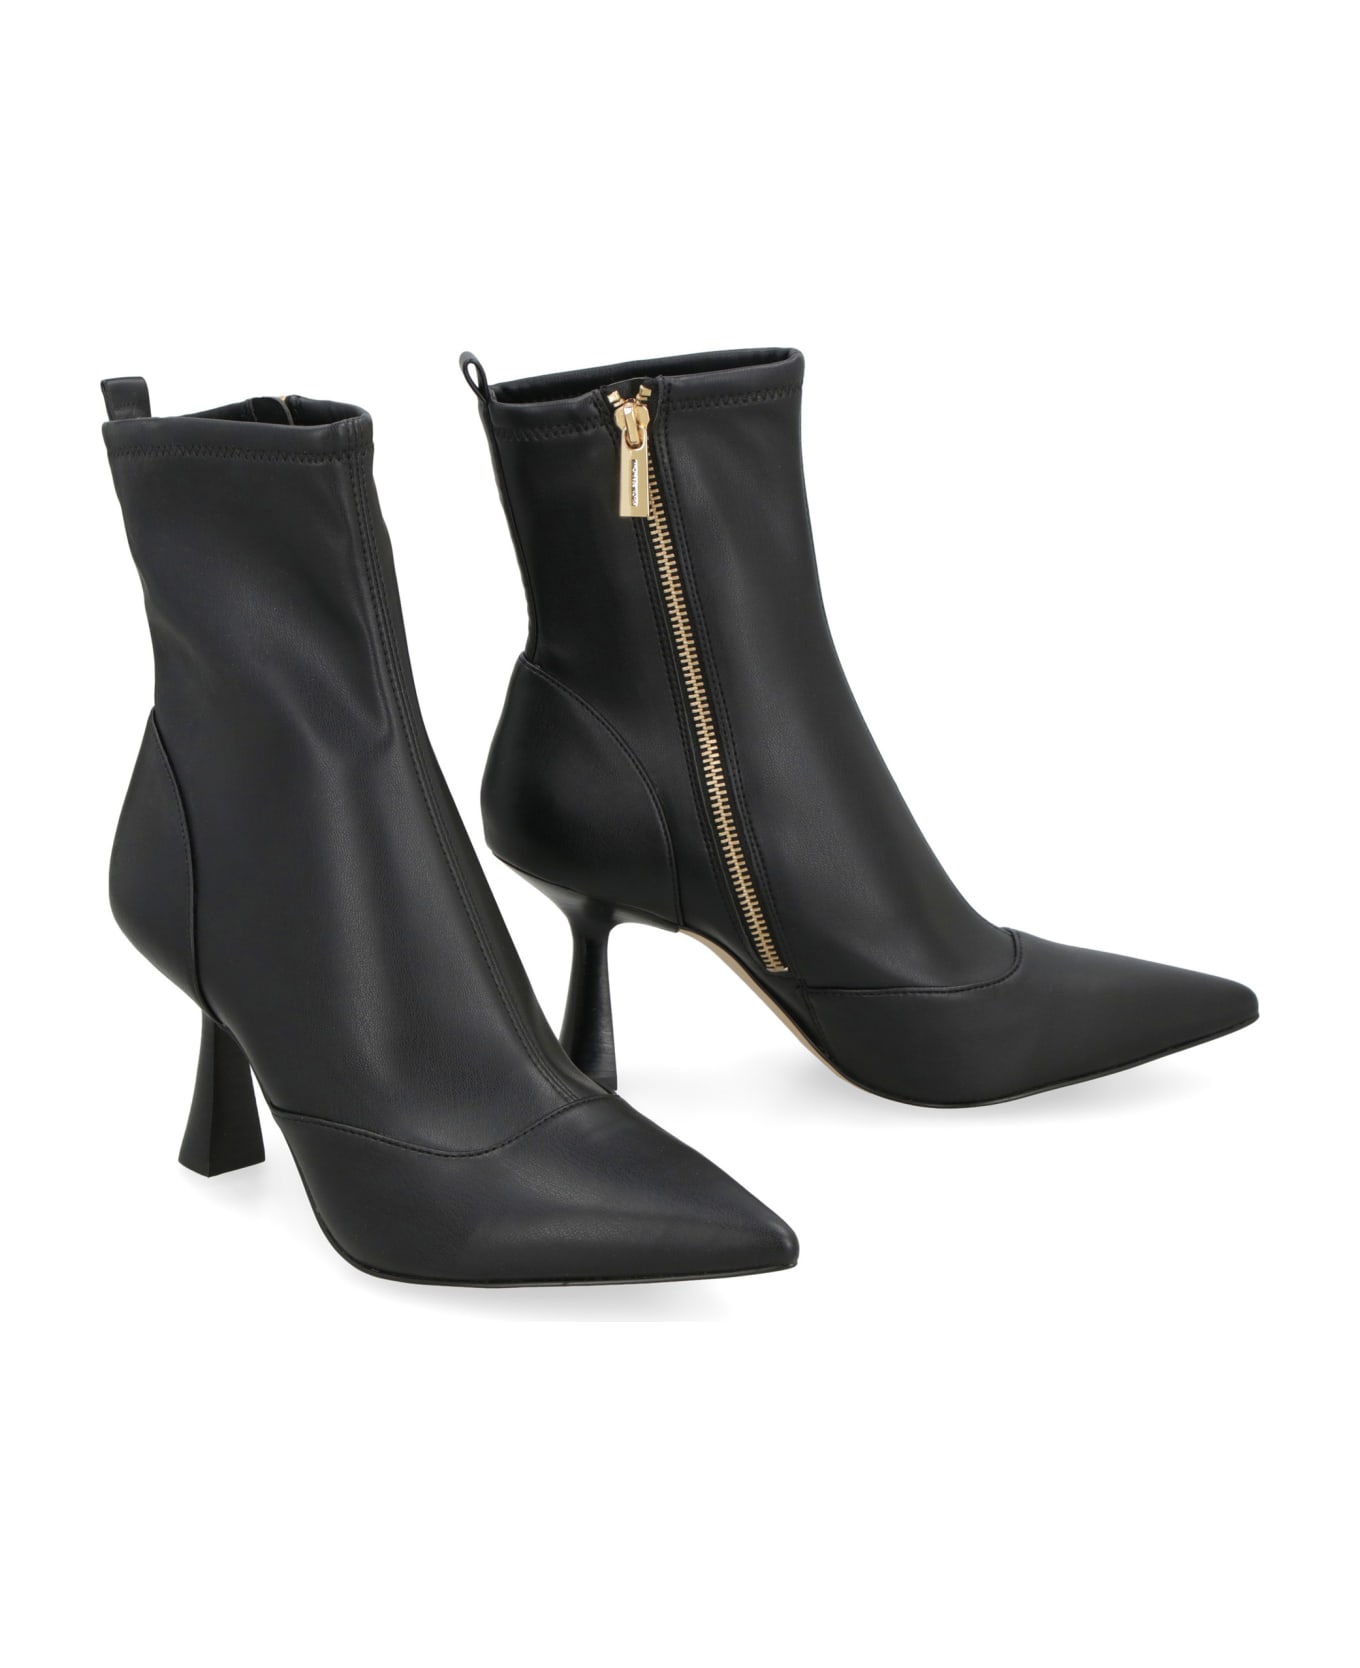 Michael Kors Clara Faux Leather Ankle Boots - Black ブーツ